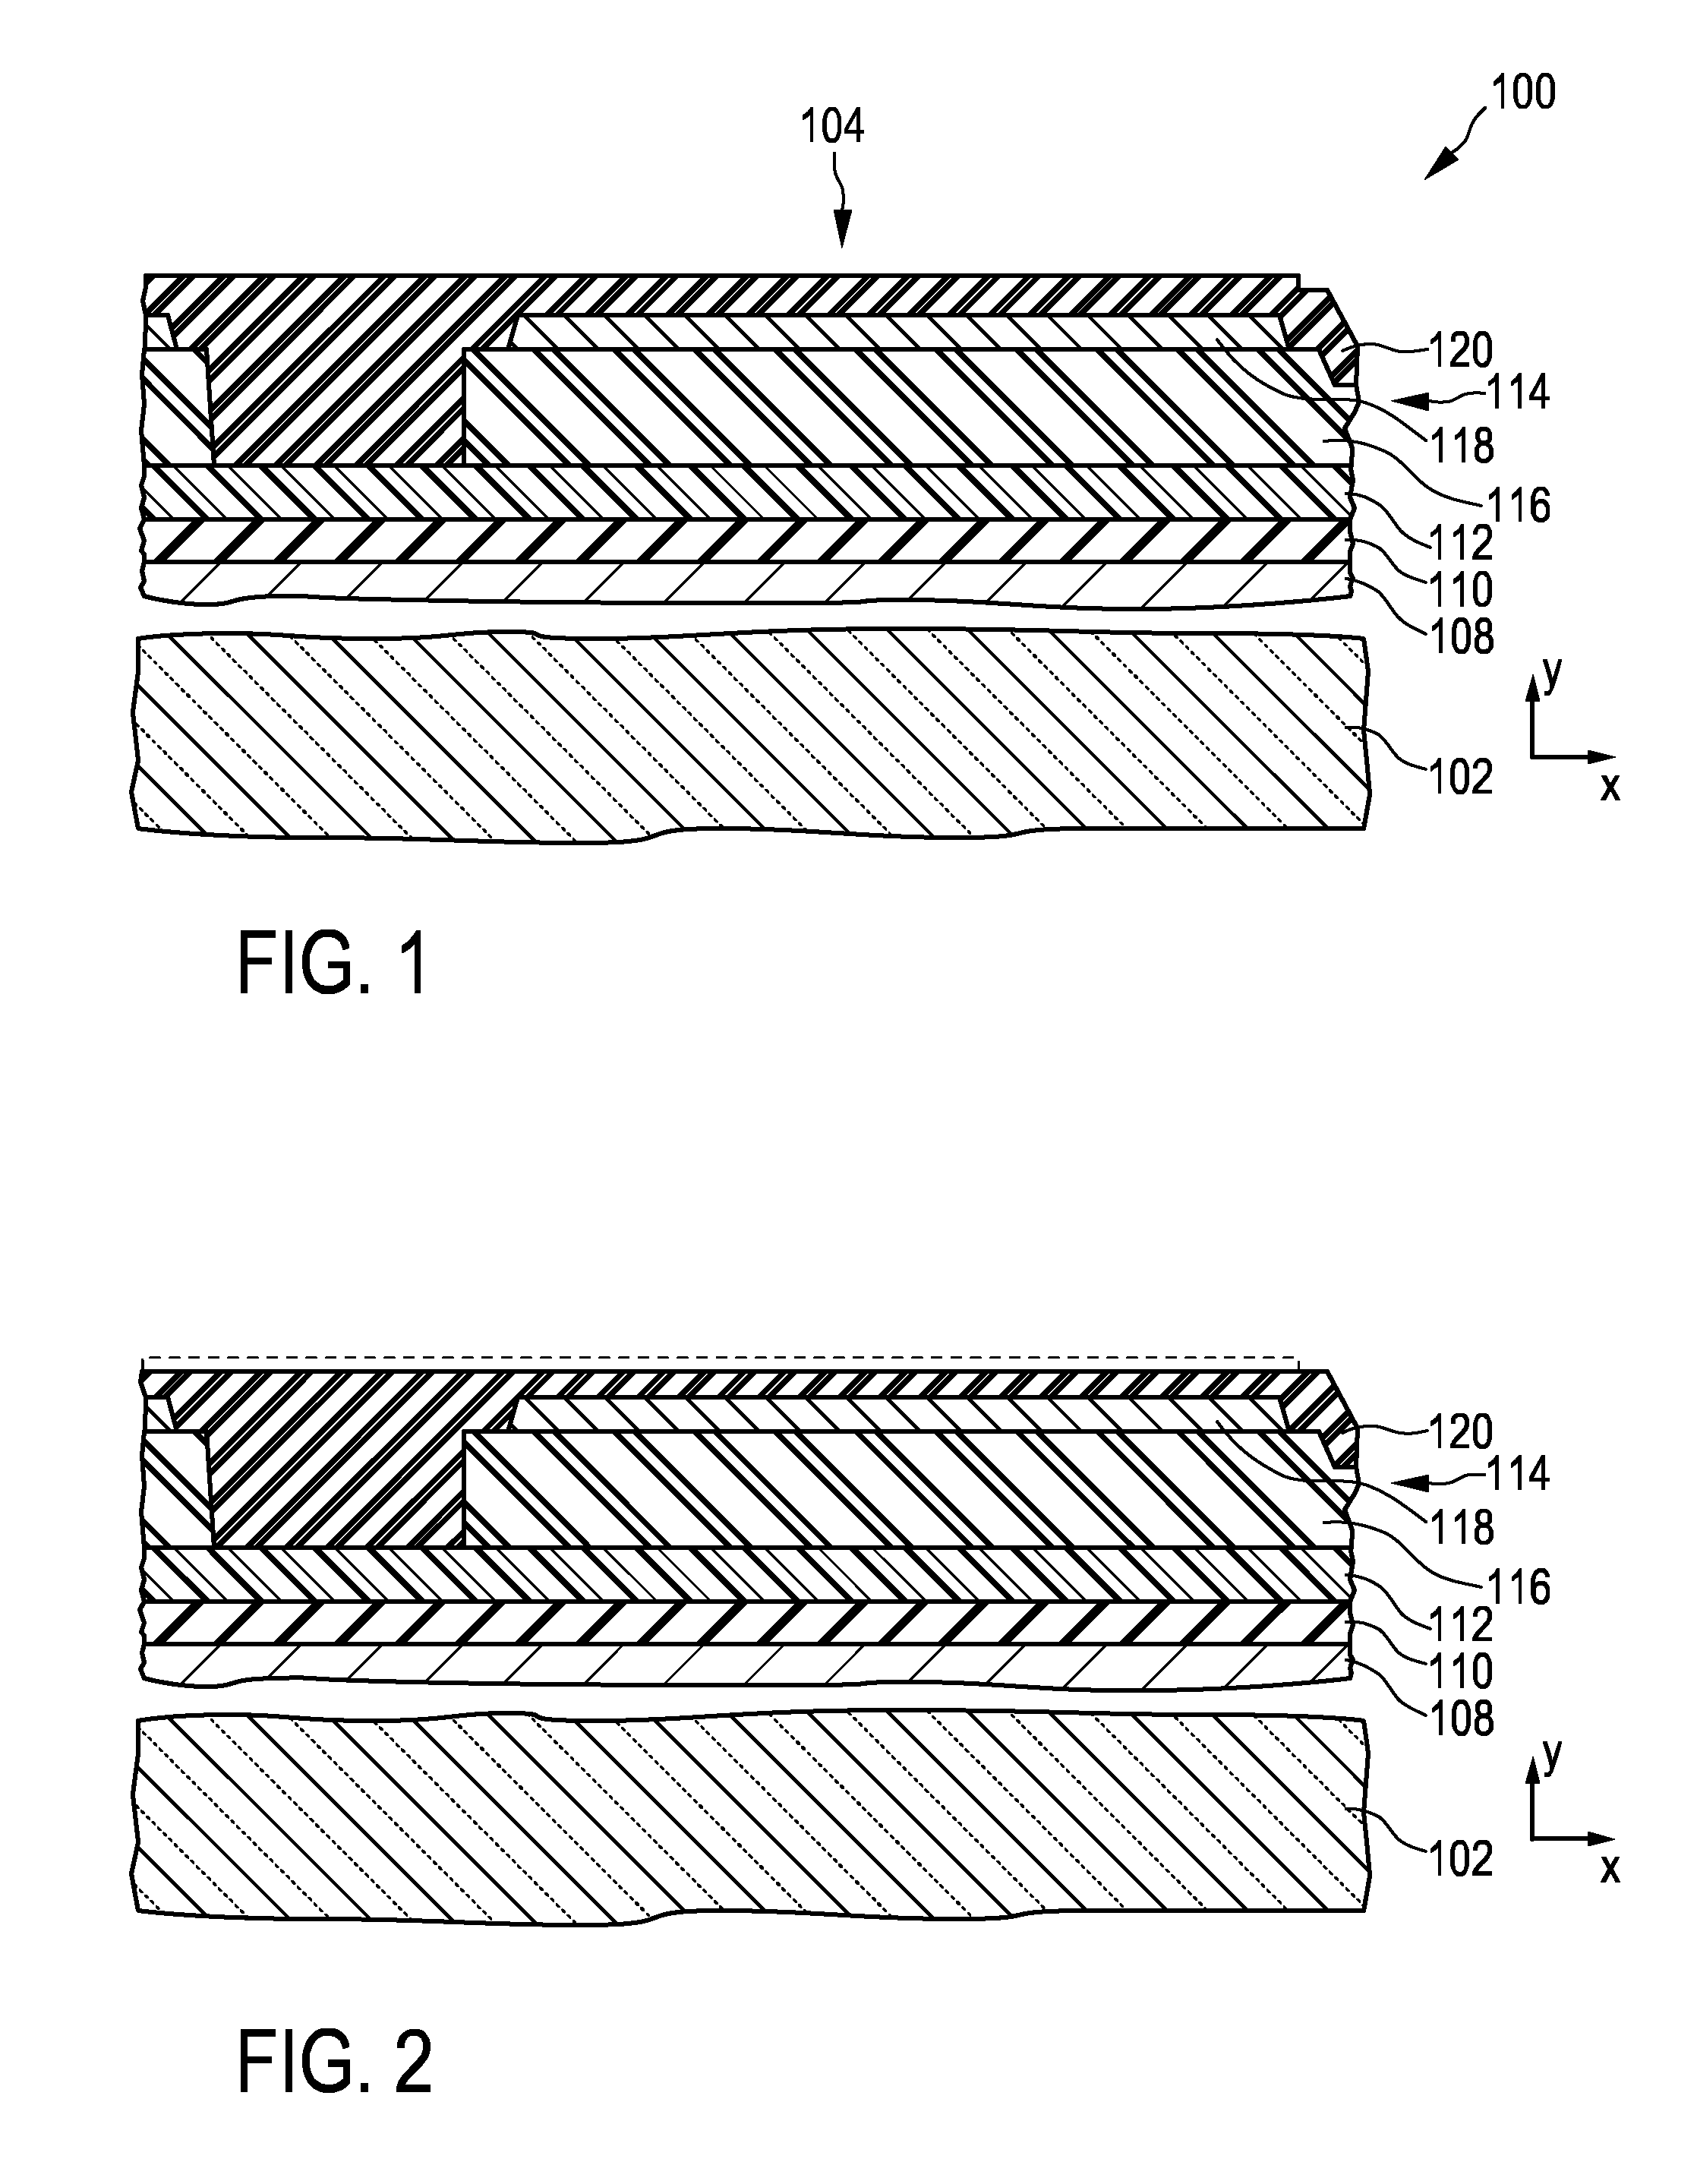 Method for fabricating an integrated-passives device with a MIM capacitor and a high-accuracy resistor on top